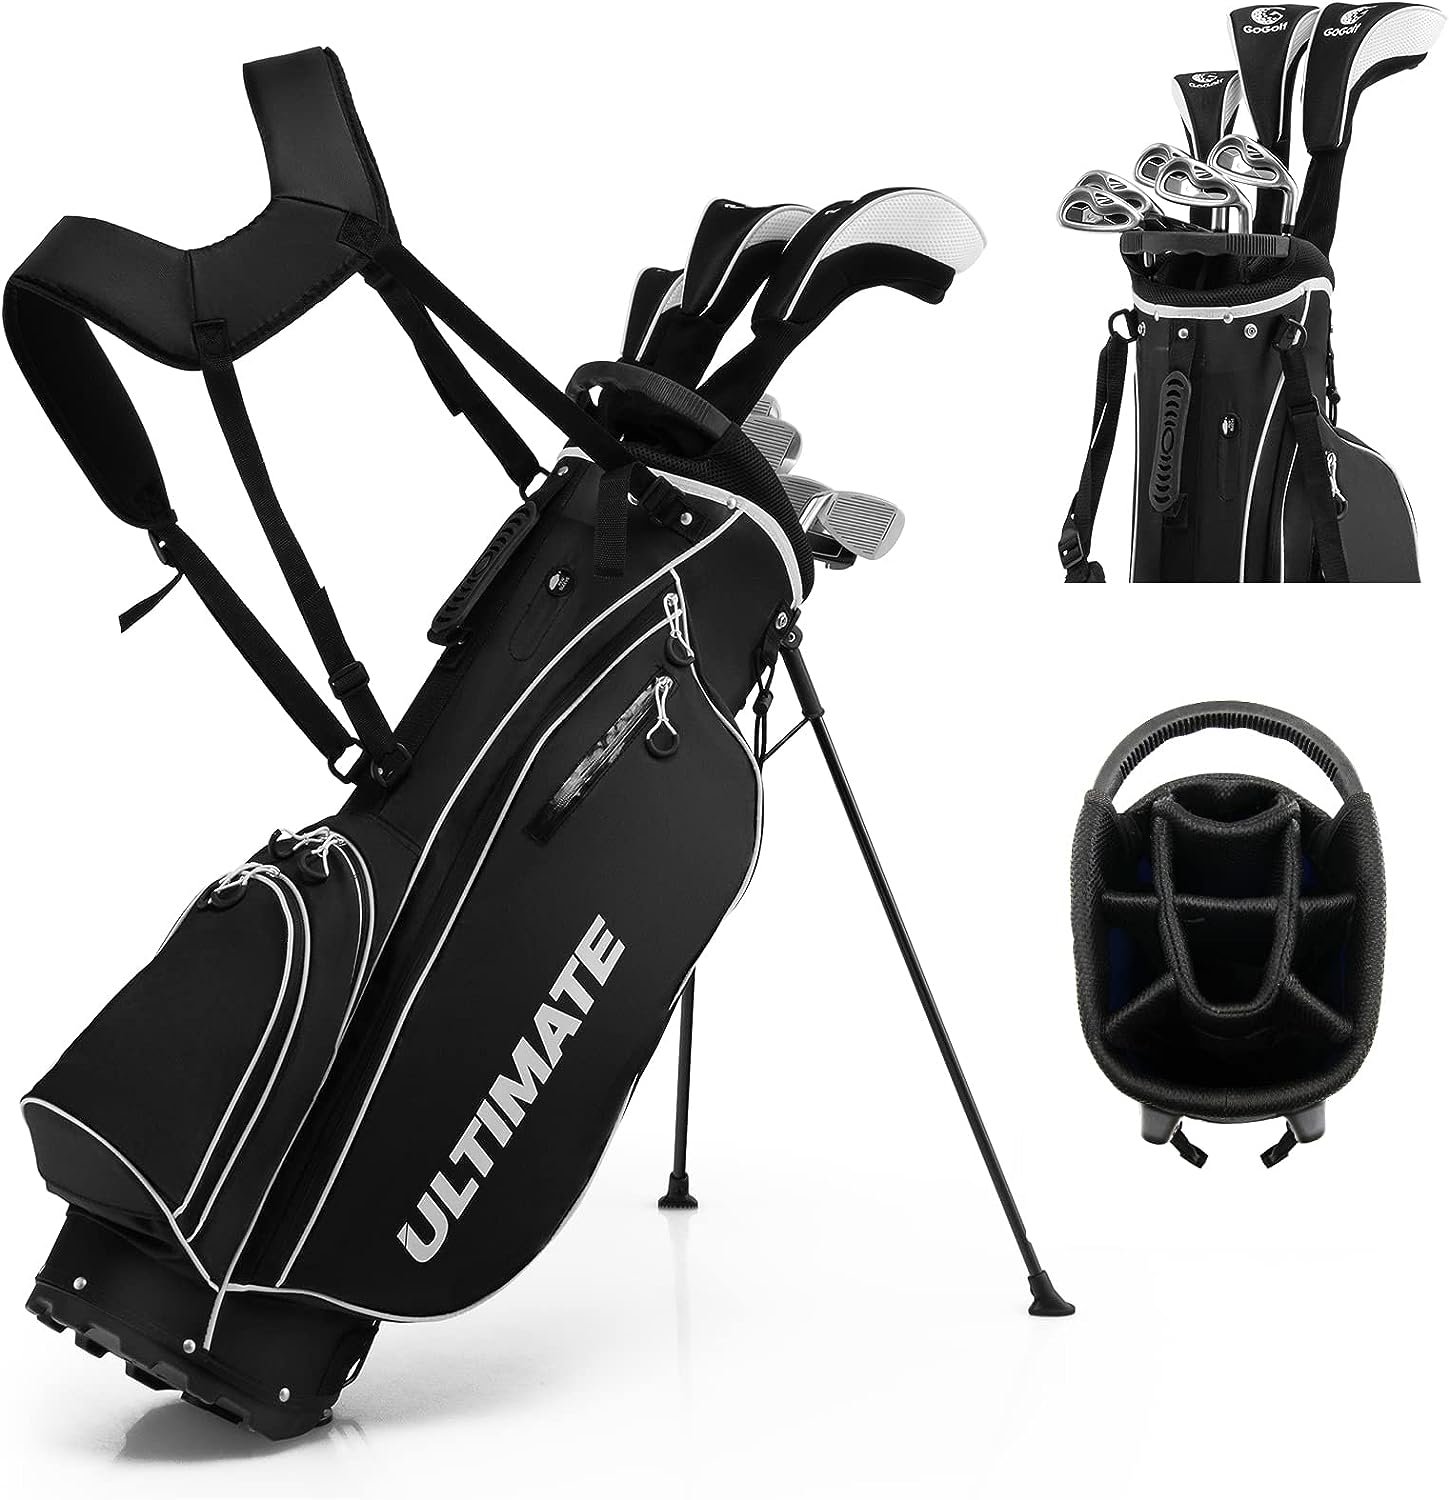 Tangkula 9/10 Pieces Mens Complete Golf Clubs Package Set Right Hand, Includes 460cc Alloy Driver, 3# Fairway Wood, 4# Hybrid, 6#, 7#, 8#, 9#  P# Irons, Pullet Putter  3 Head Covers